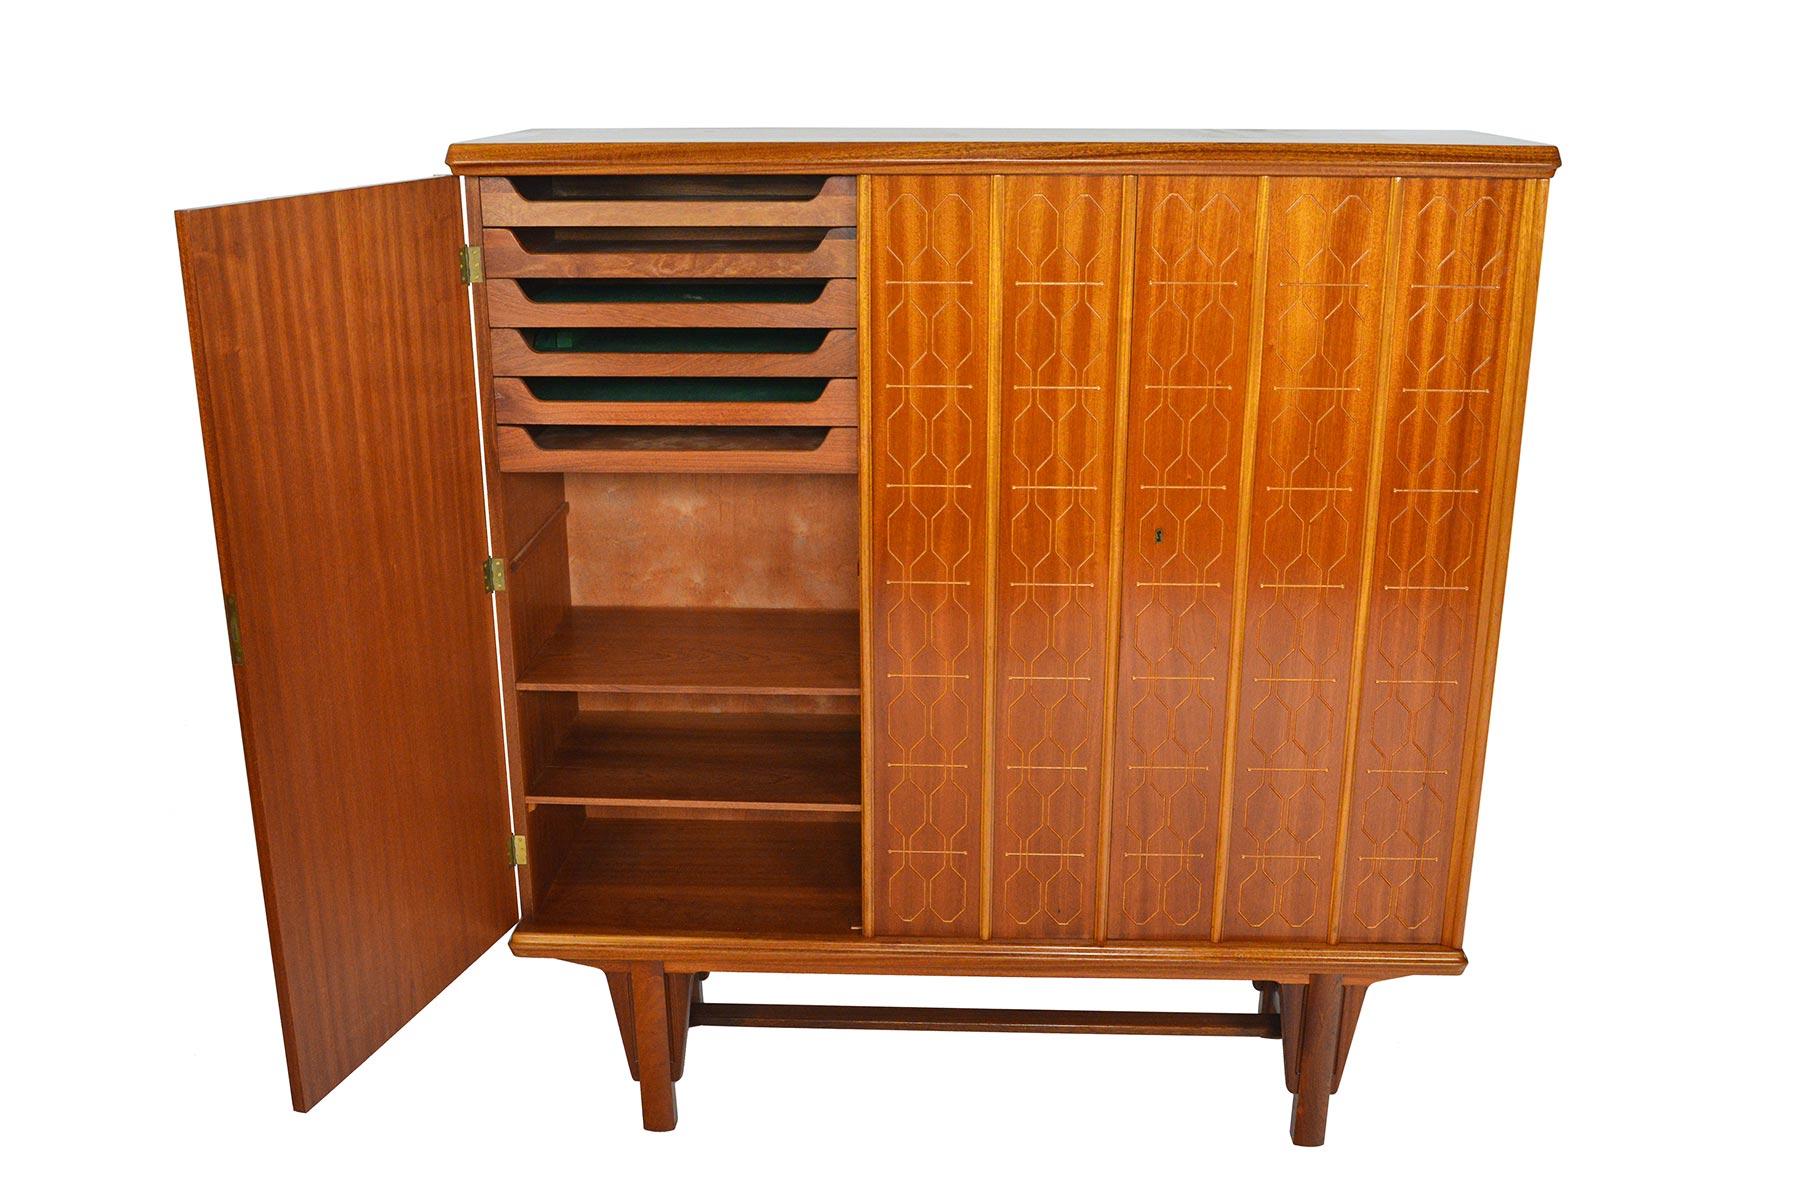 This tall Norwegian sideboard was designed by Adolf Rastad and Rolf Relling for Eidsfjord Møbler in the 1950s. Mahogany doors are adorned with a routed geometric design and beveled trim. Left door opens to a narrow bay outfitted with six drawers and